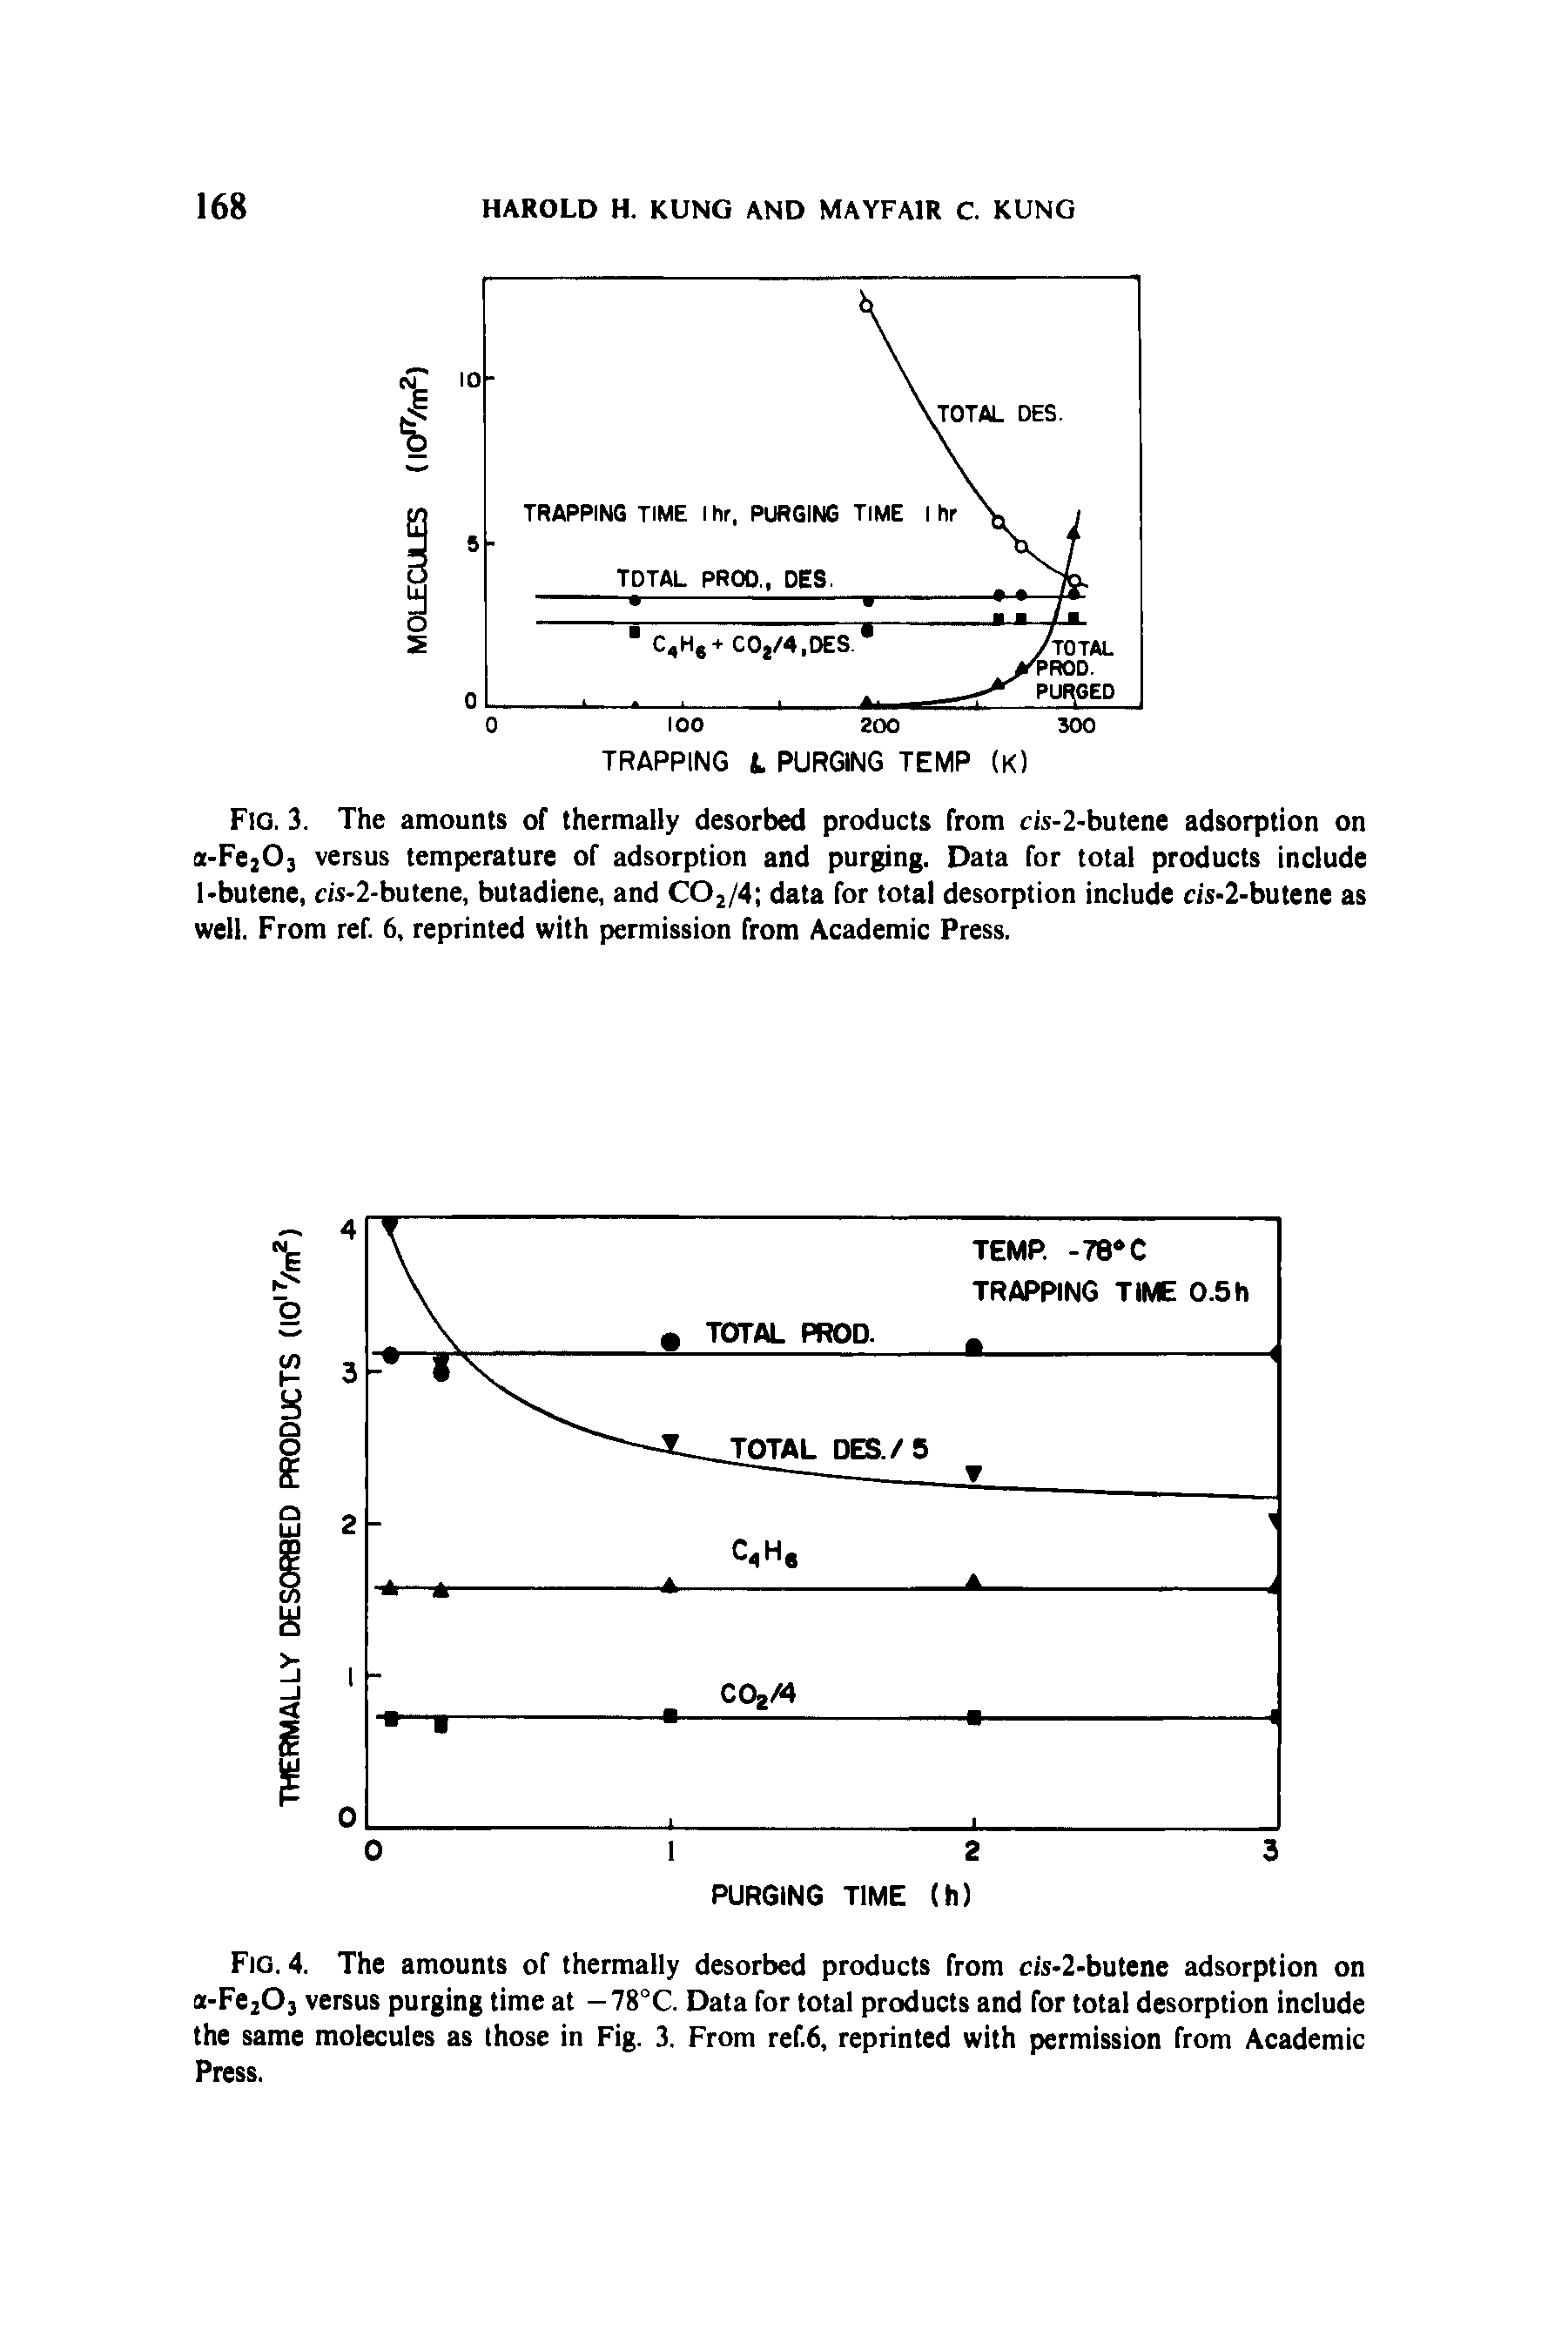 Fig. 3. The amounts of thermally desorbed products from cis-2-butene adsorption on a-Fe203 versus temperature of adsorption and purging. Data for total products include 1-butene, ris-2-butene, butadiene, and C02/4 data for total desorption include c/s-2-butene as well. From ref. 6, reprinted with permission from Academic Press.